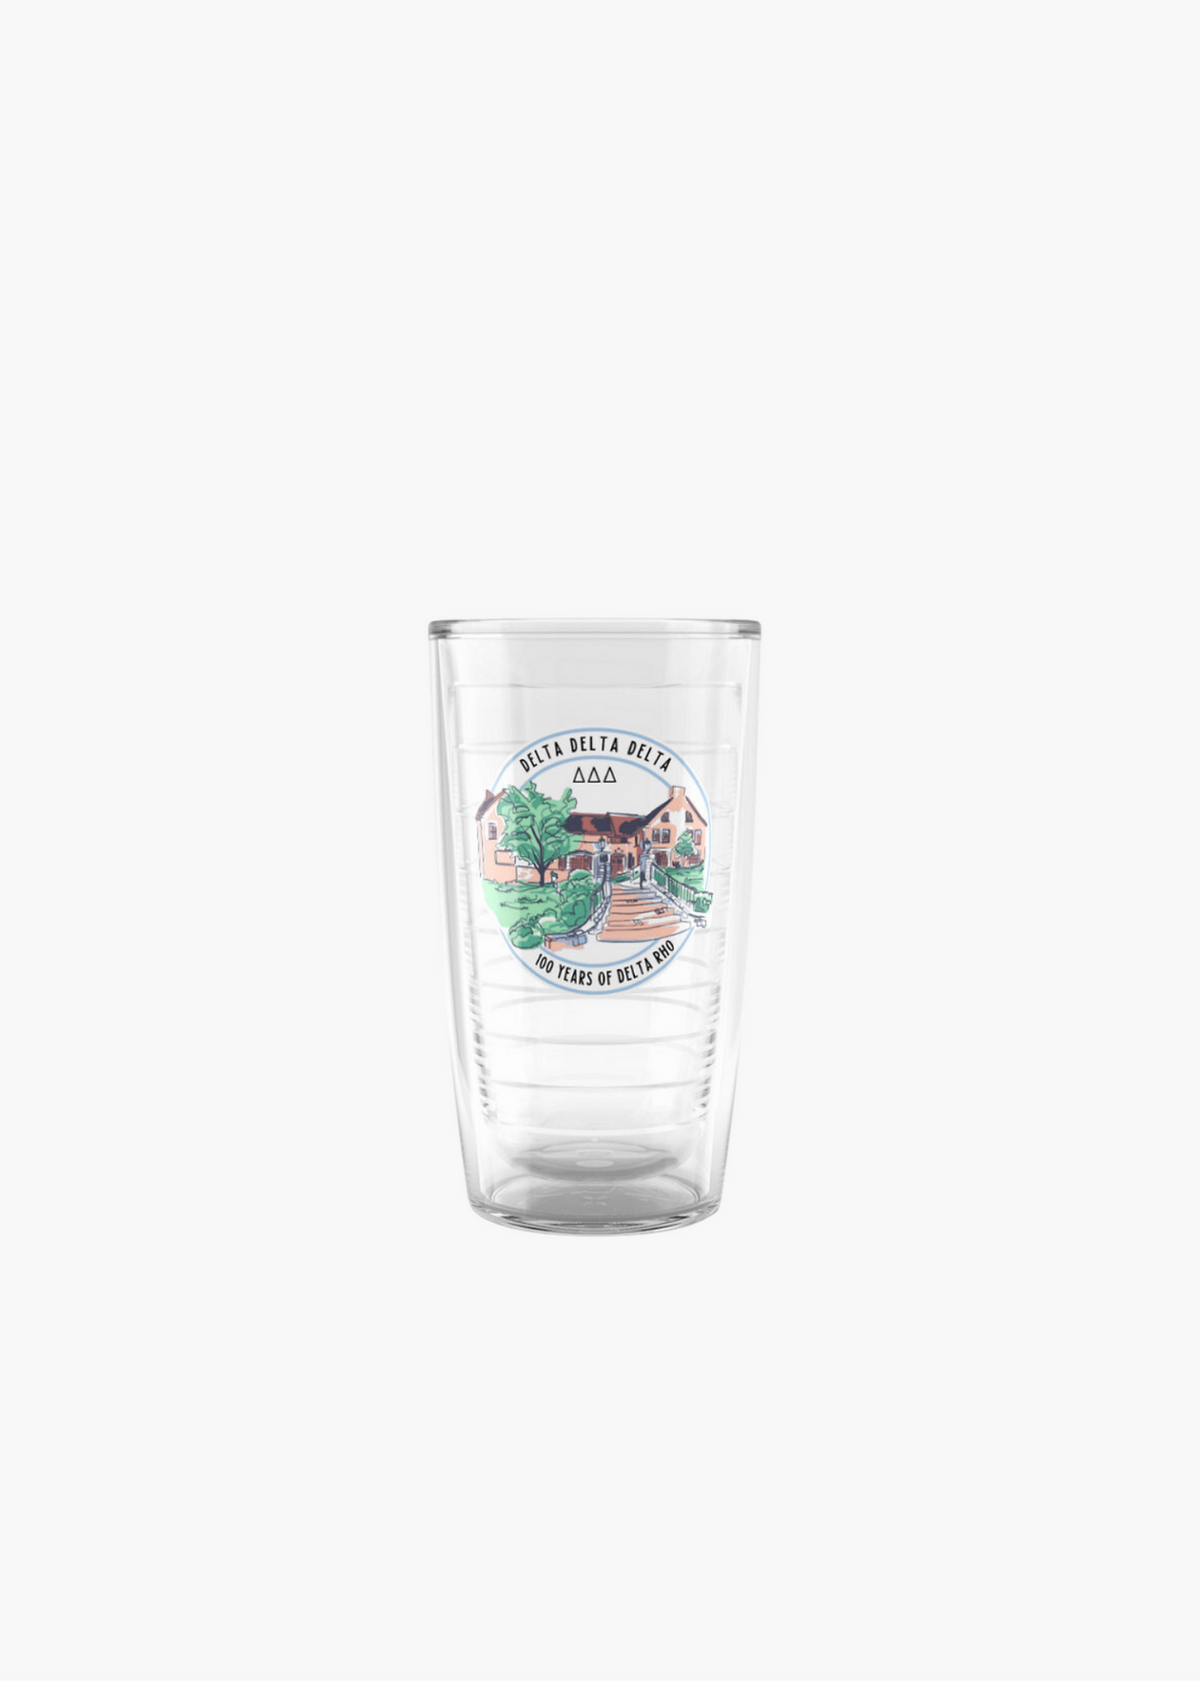 Preorder: Delta Rho Centennial Embroidered Patch Tervis® Tumbler